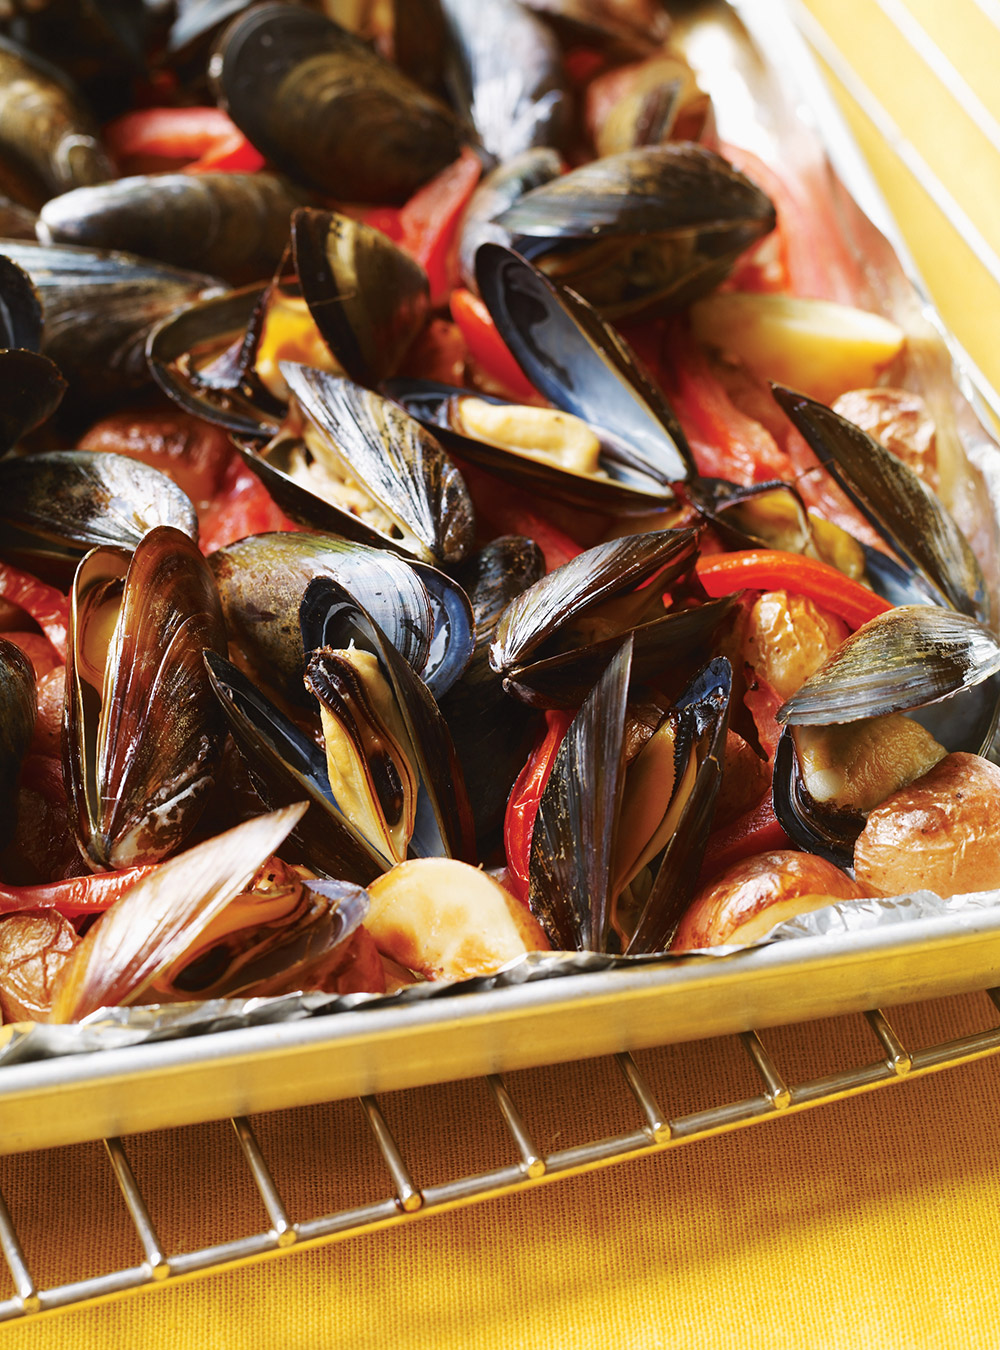 Broiled Mussels with Tomatoes and Potatoes